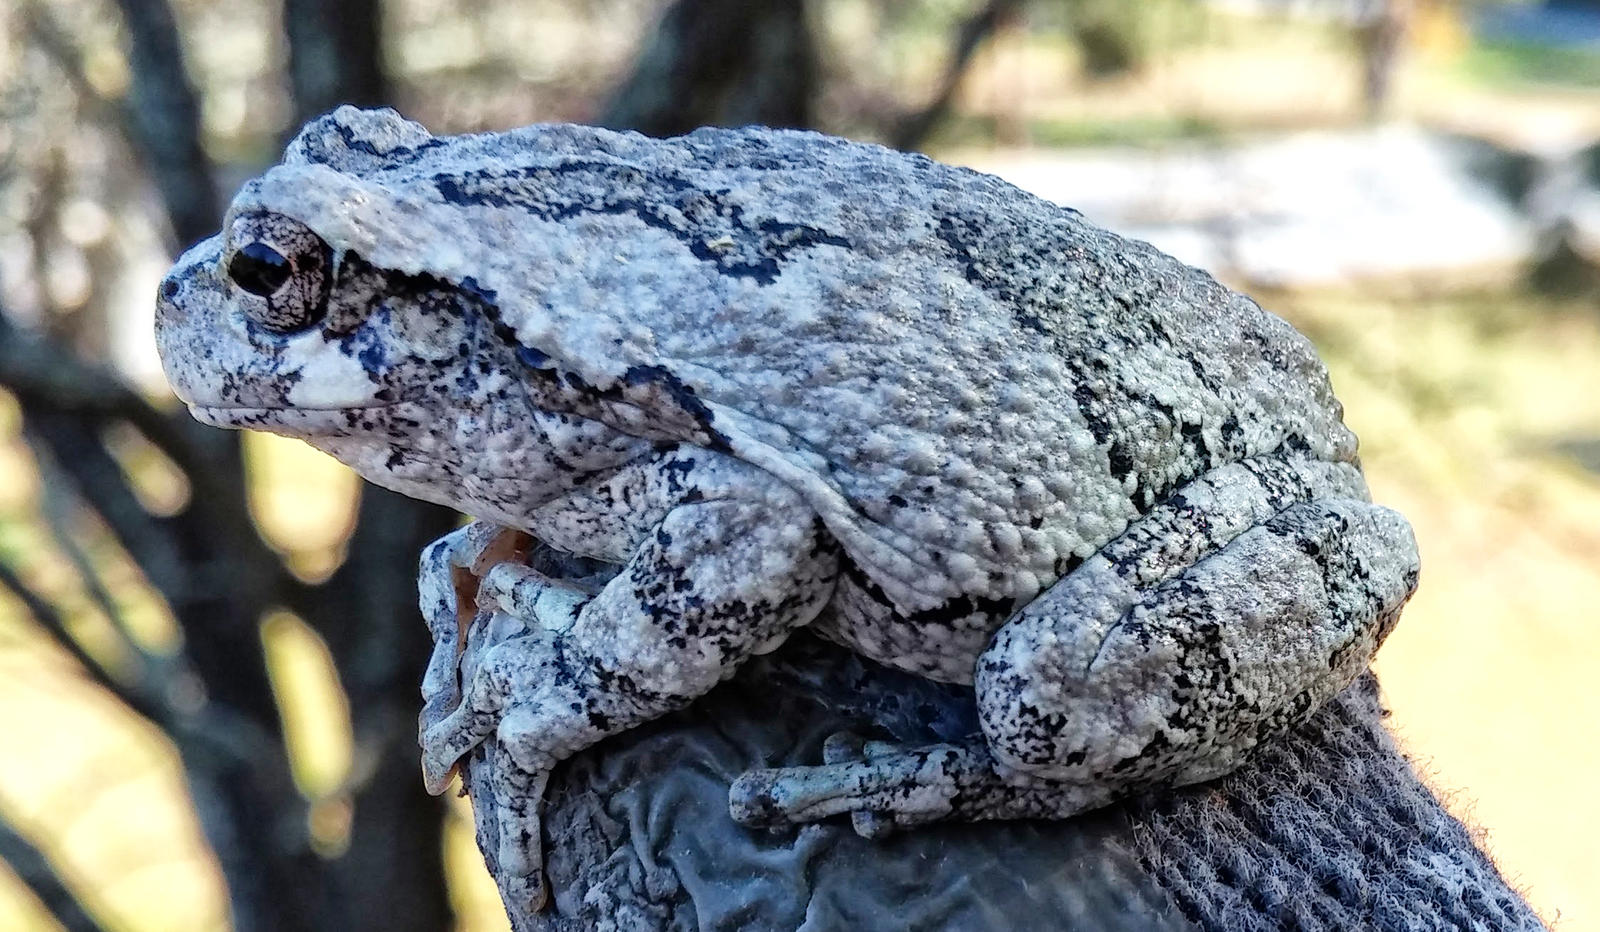 Tree Frog in Camo